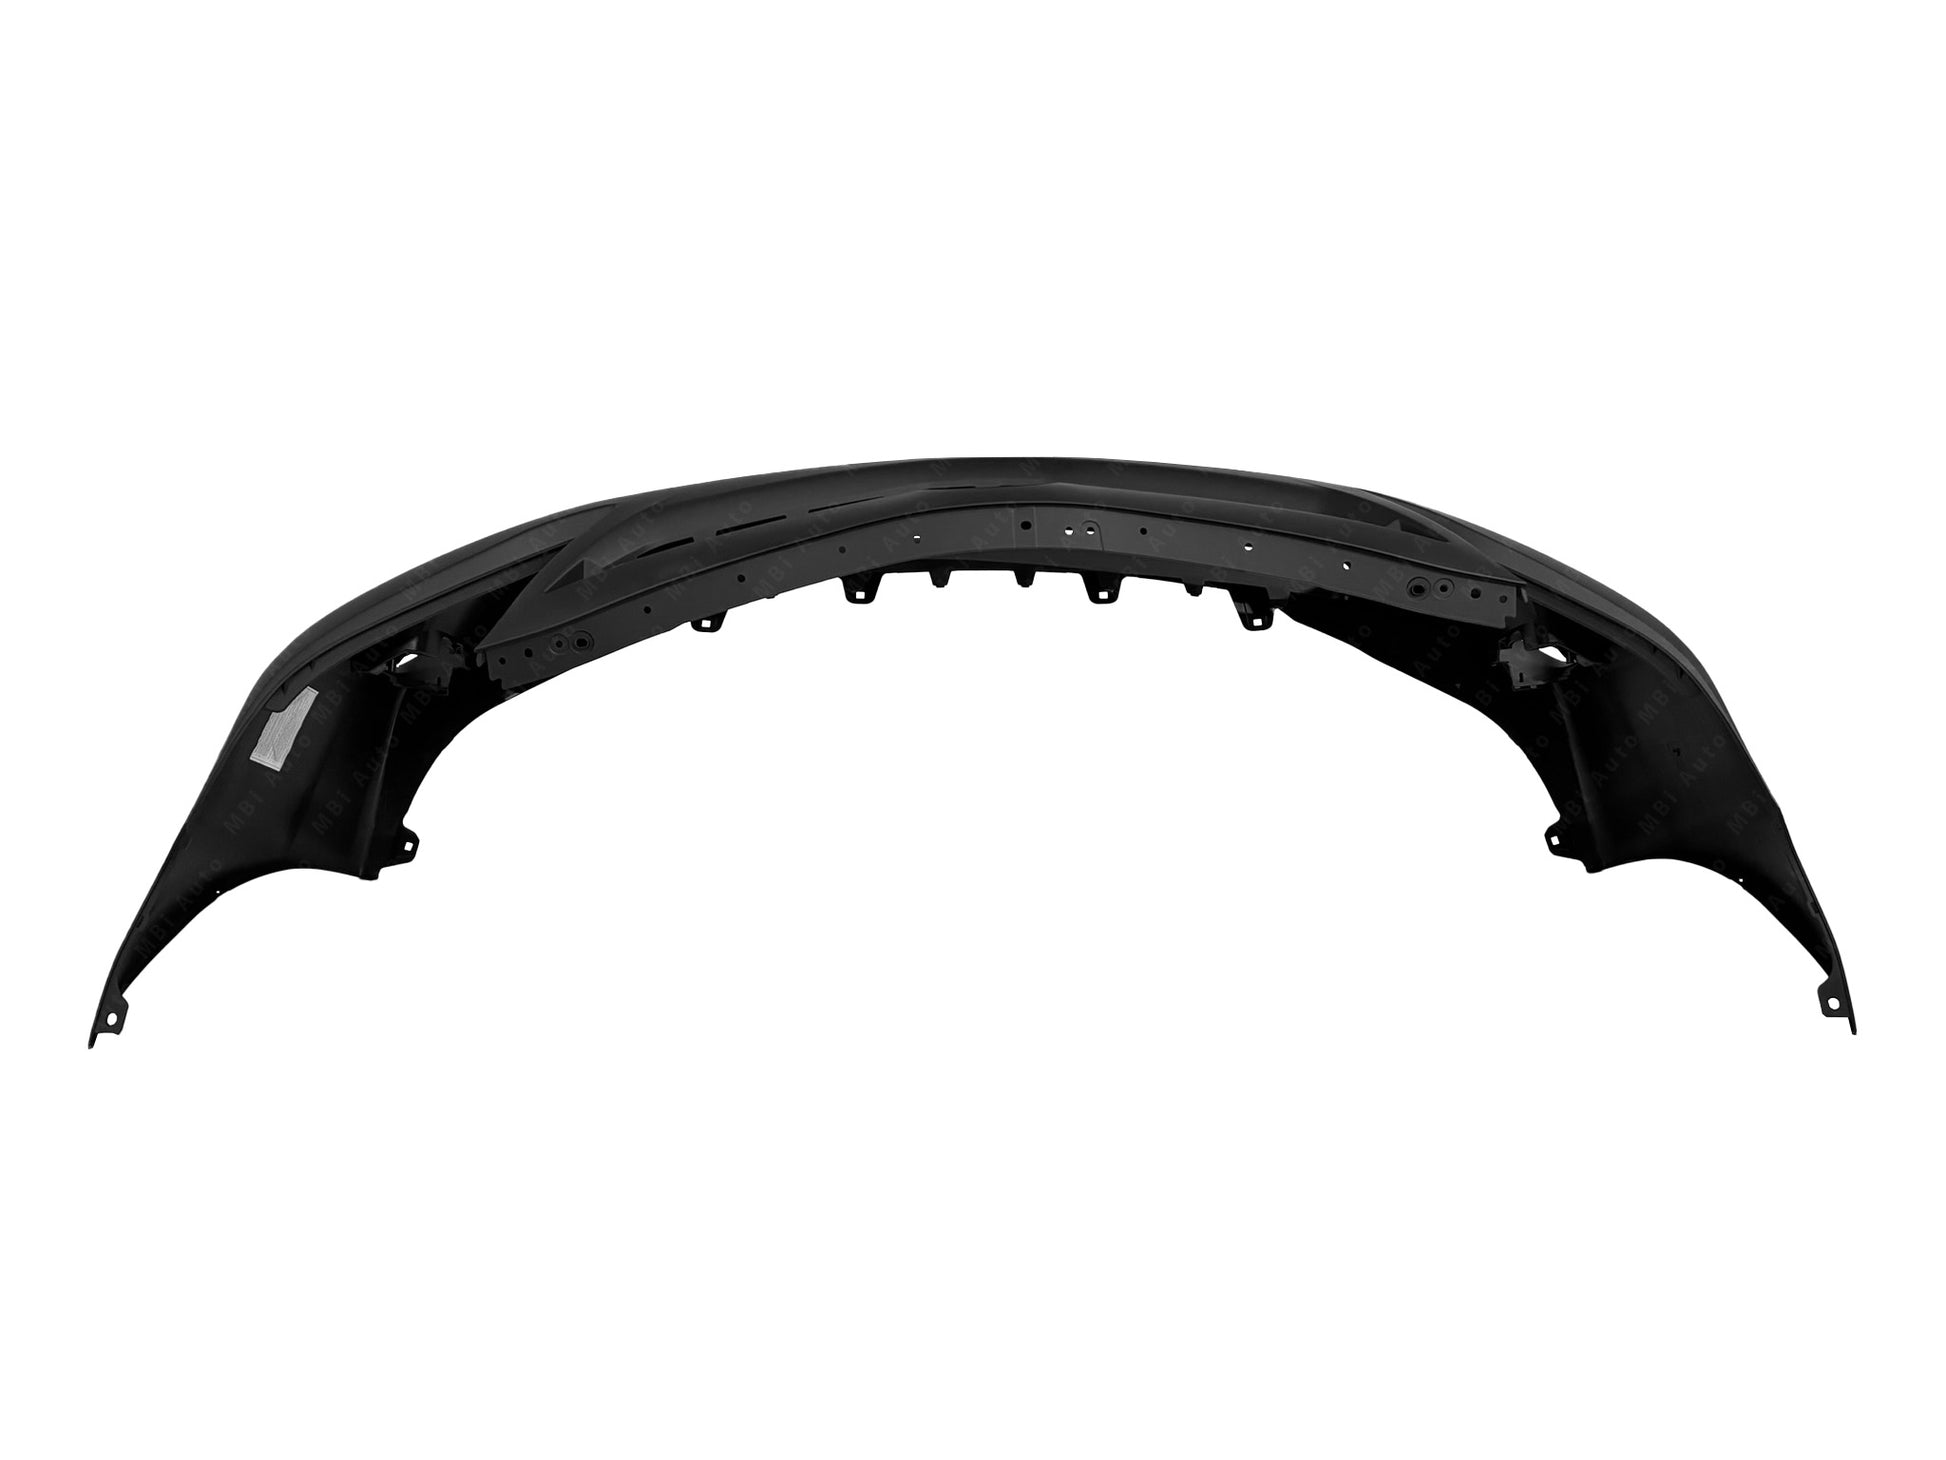 Toyota Camry 2010 - 2011 Front Bumper Cover 10 - 11 TO1000370 Bumper King